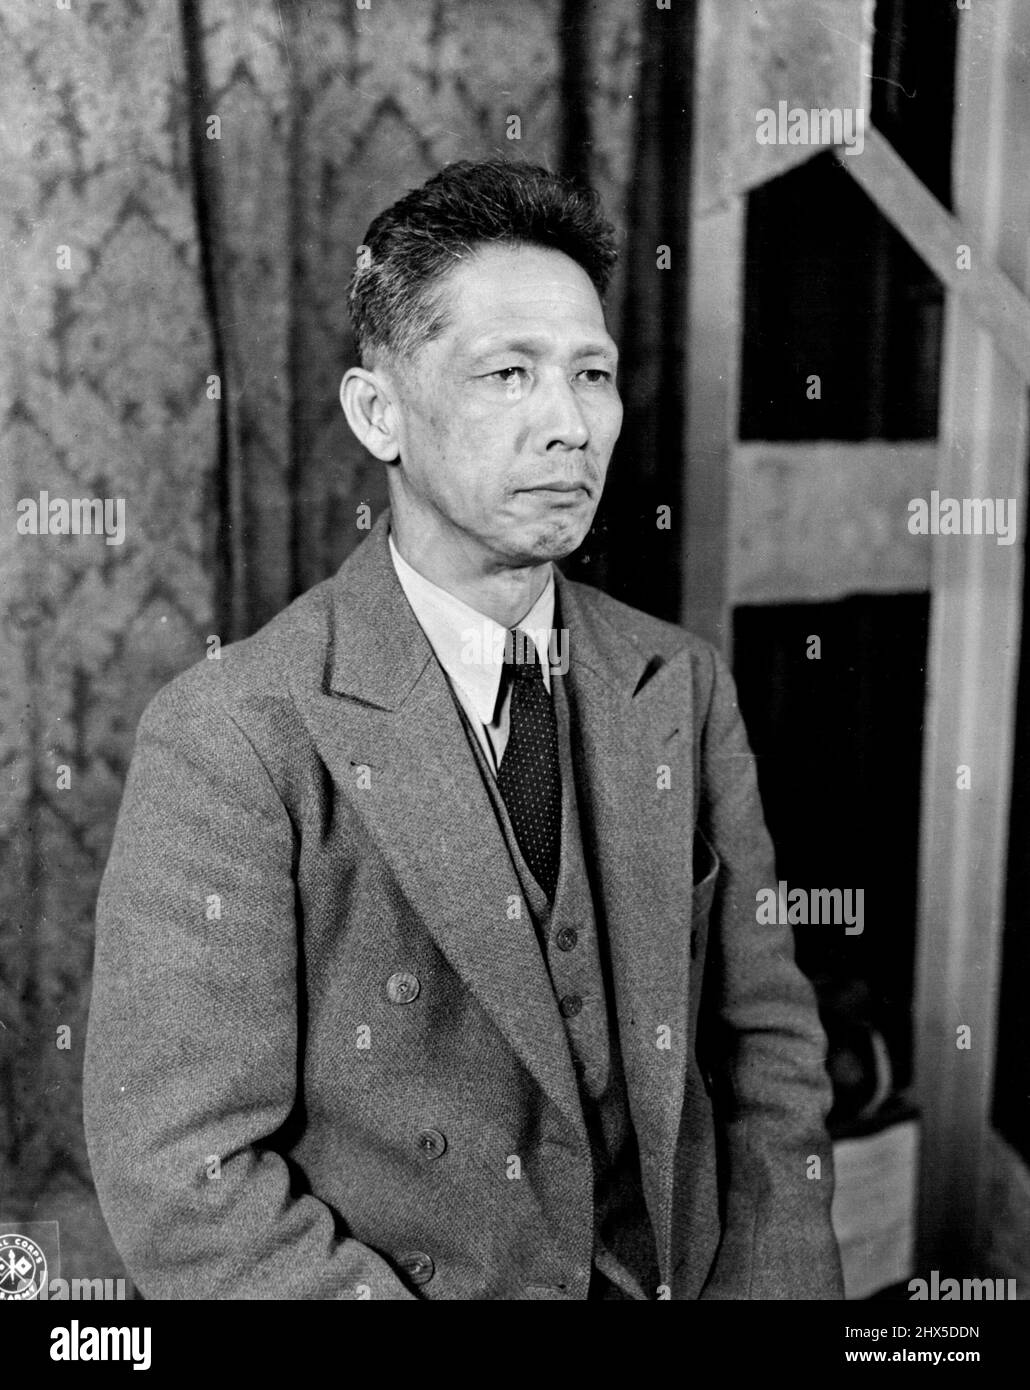 Major Japanese War Criminals on Trial in Tokyo : Suzuki Teiichi, Former President of the cabinet planning board and minister without portfolio under Konoye and Tojo from 1941 to 1943, is on trial at the International military tribunal for the Far East, Tokyo, Japan. June 19, 1947. (Photo by Skinner, U.S. Army Signal Corps). Stock Photo